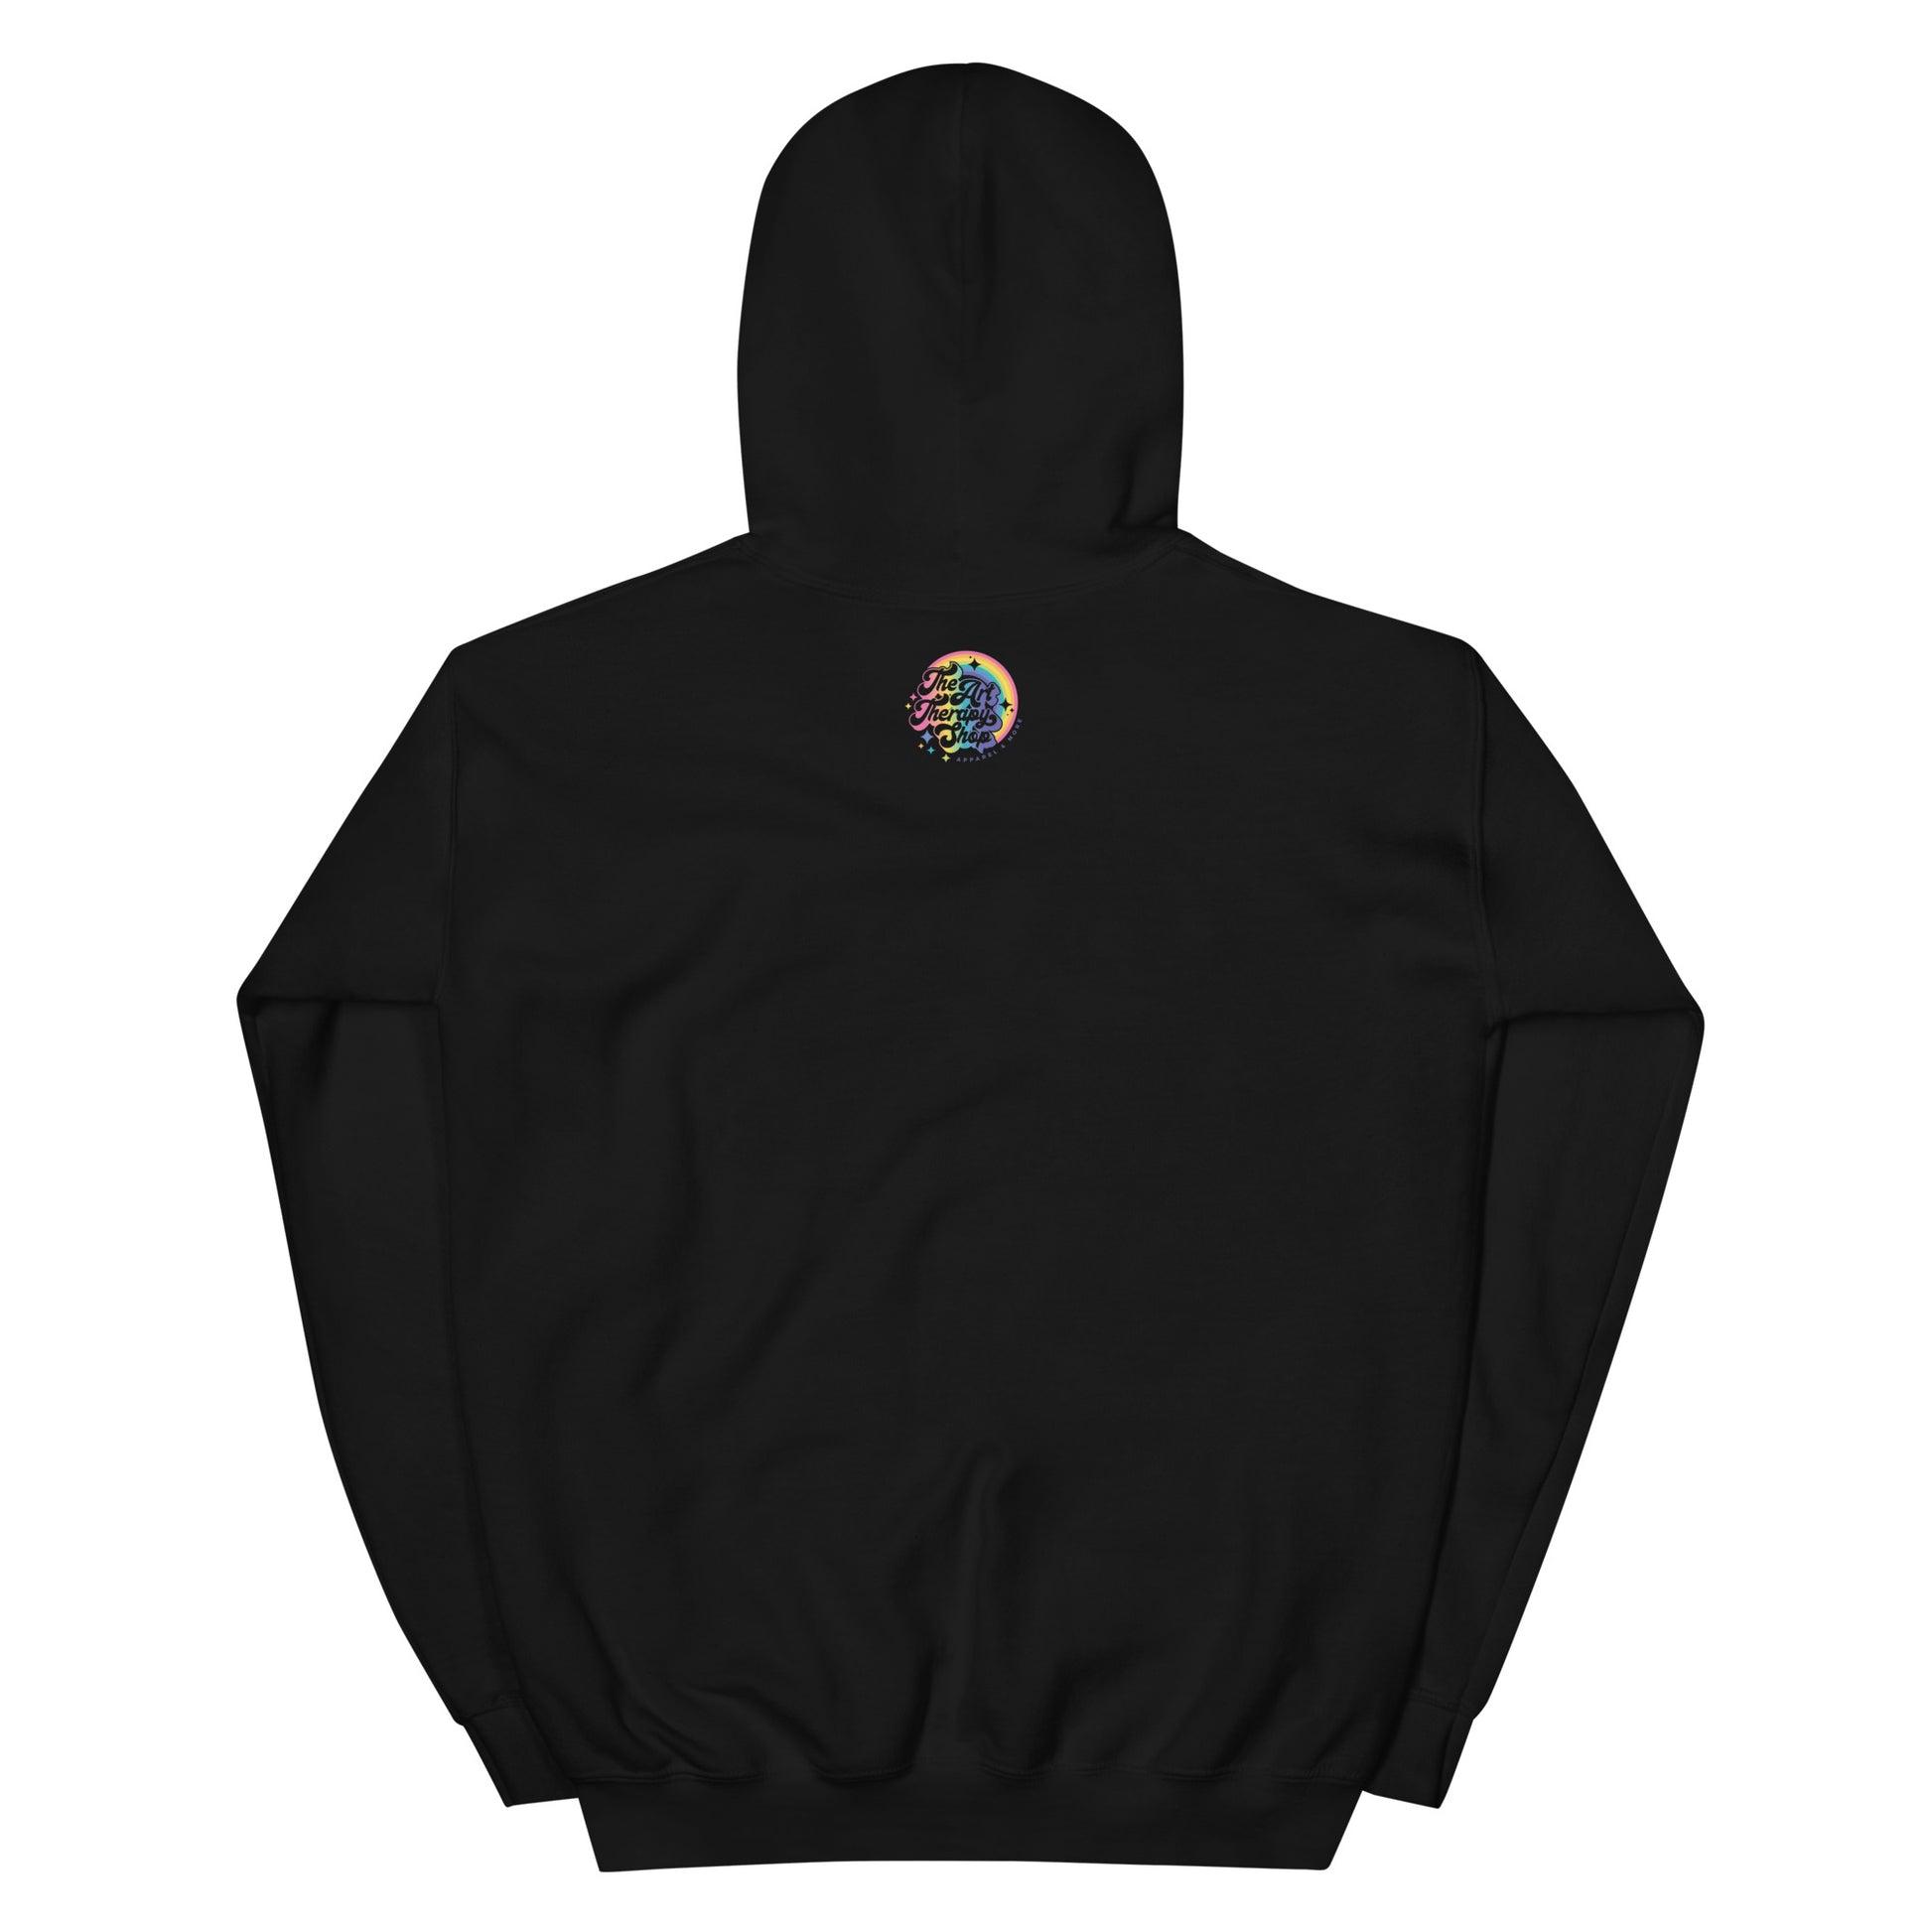 Will Work For Art Supplies Hoodie